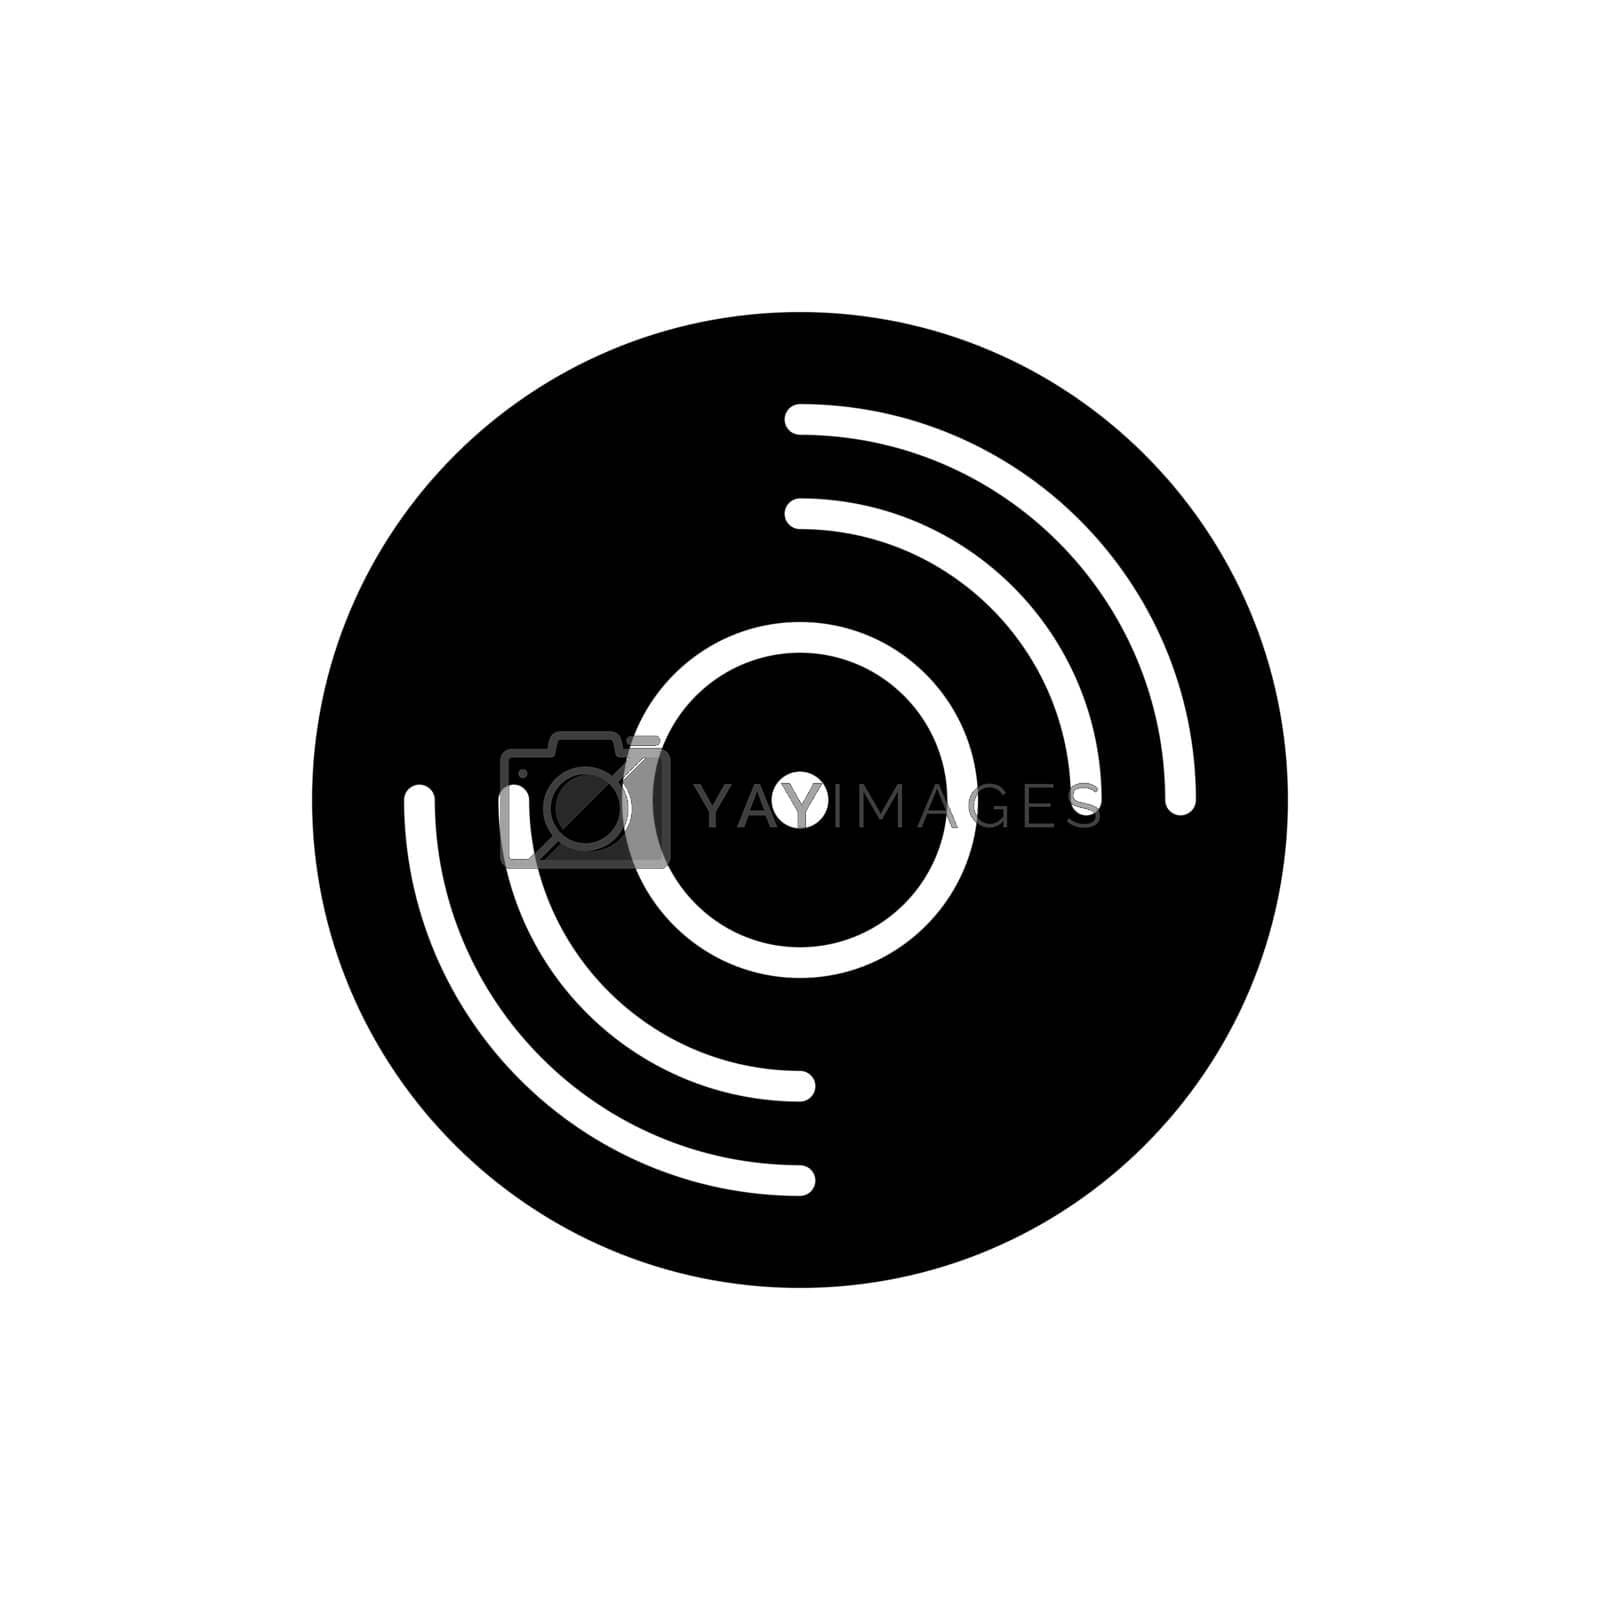 Royalty free image of Vinyl record, lp record vector glyph icon by nosik